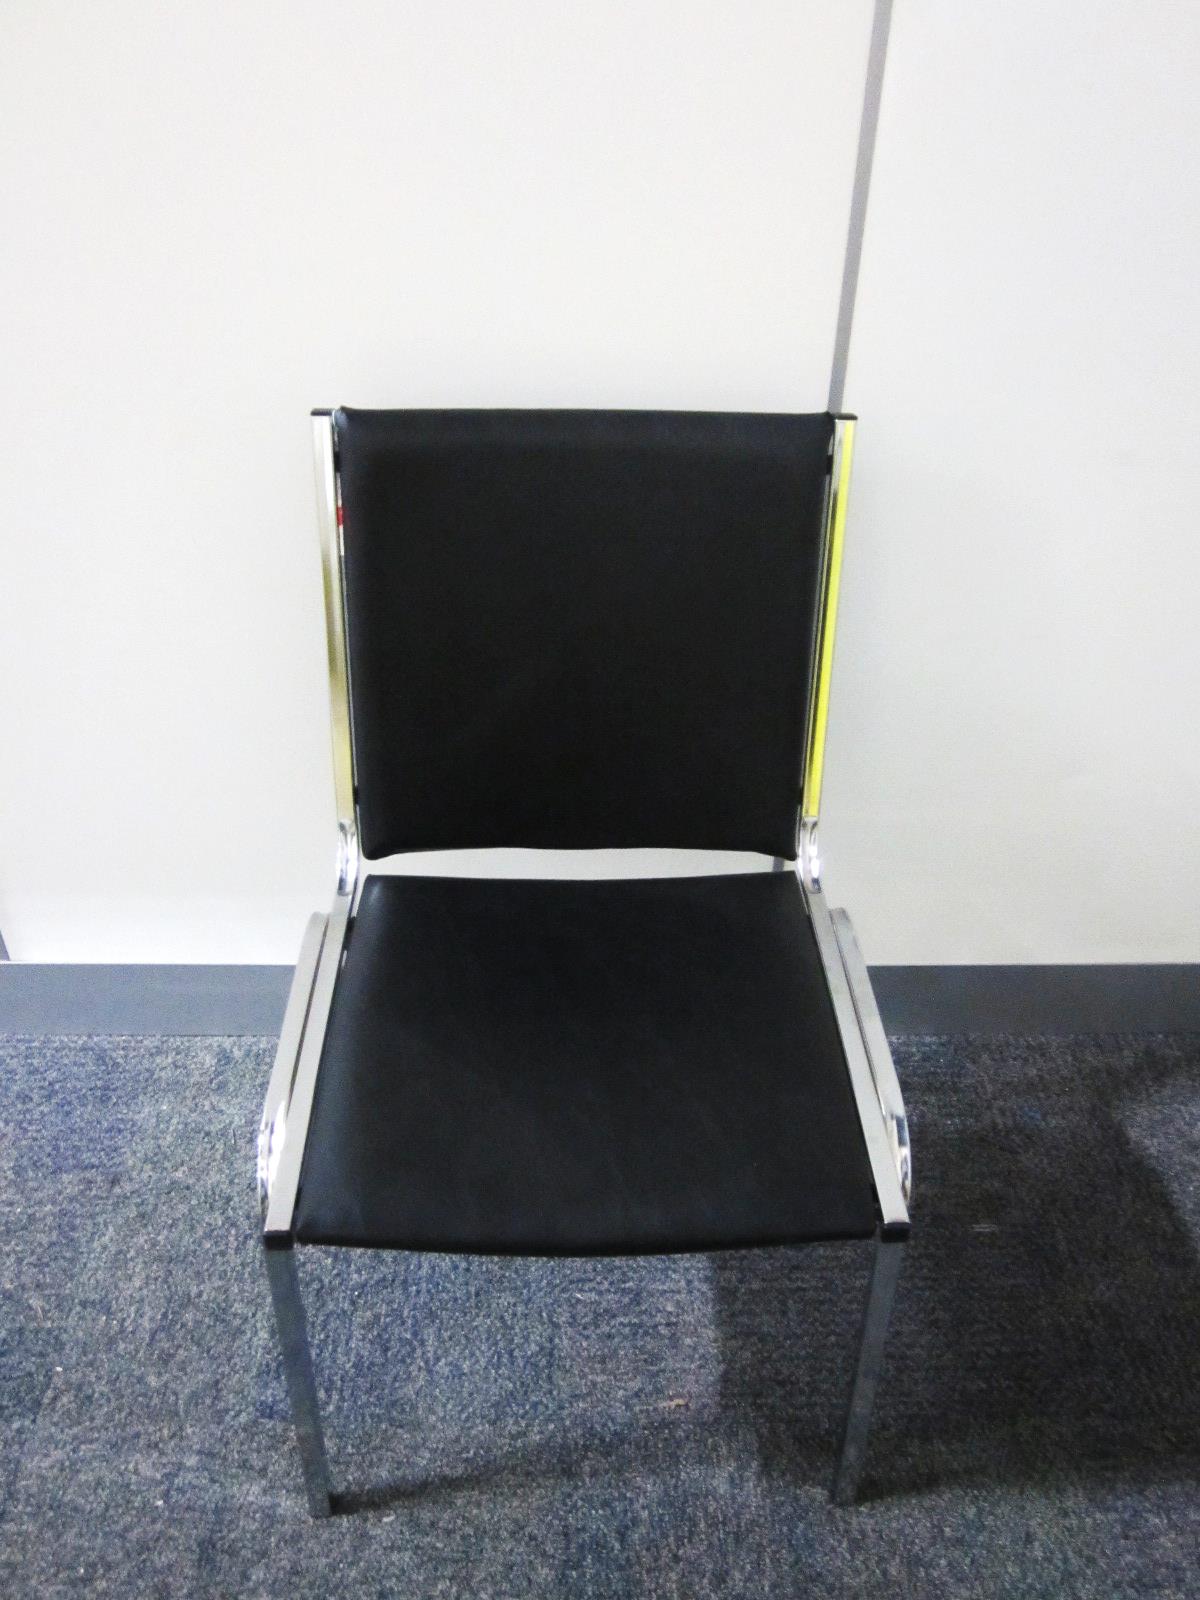 OFFICES TO GO STACK CHAIR